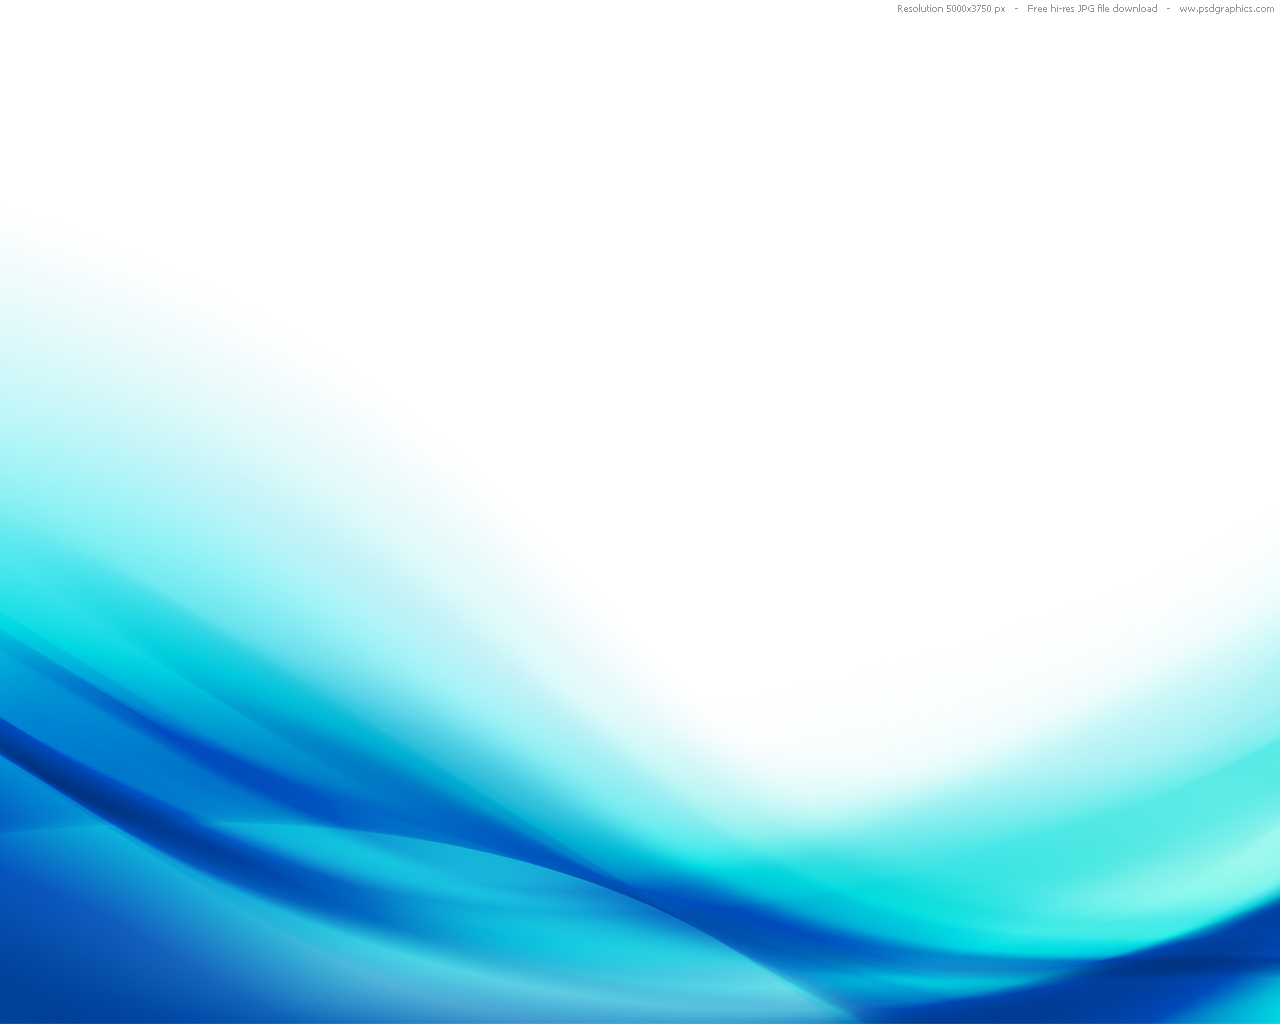 Abstract Backgrounds 1852 Hd Wallpapers in Abstract   Imagescicom 1280x1024